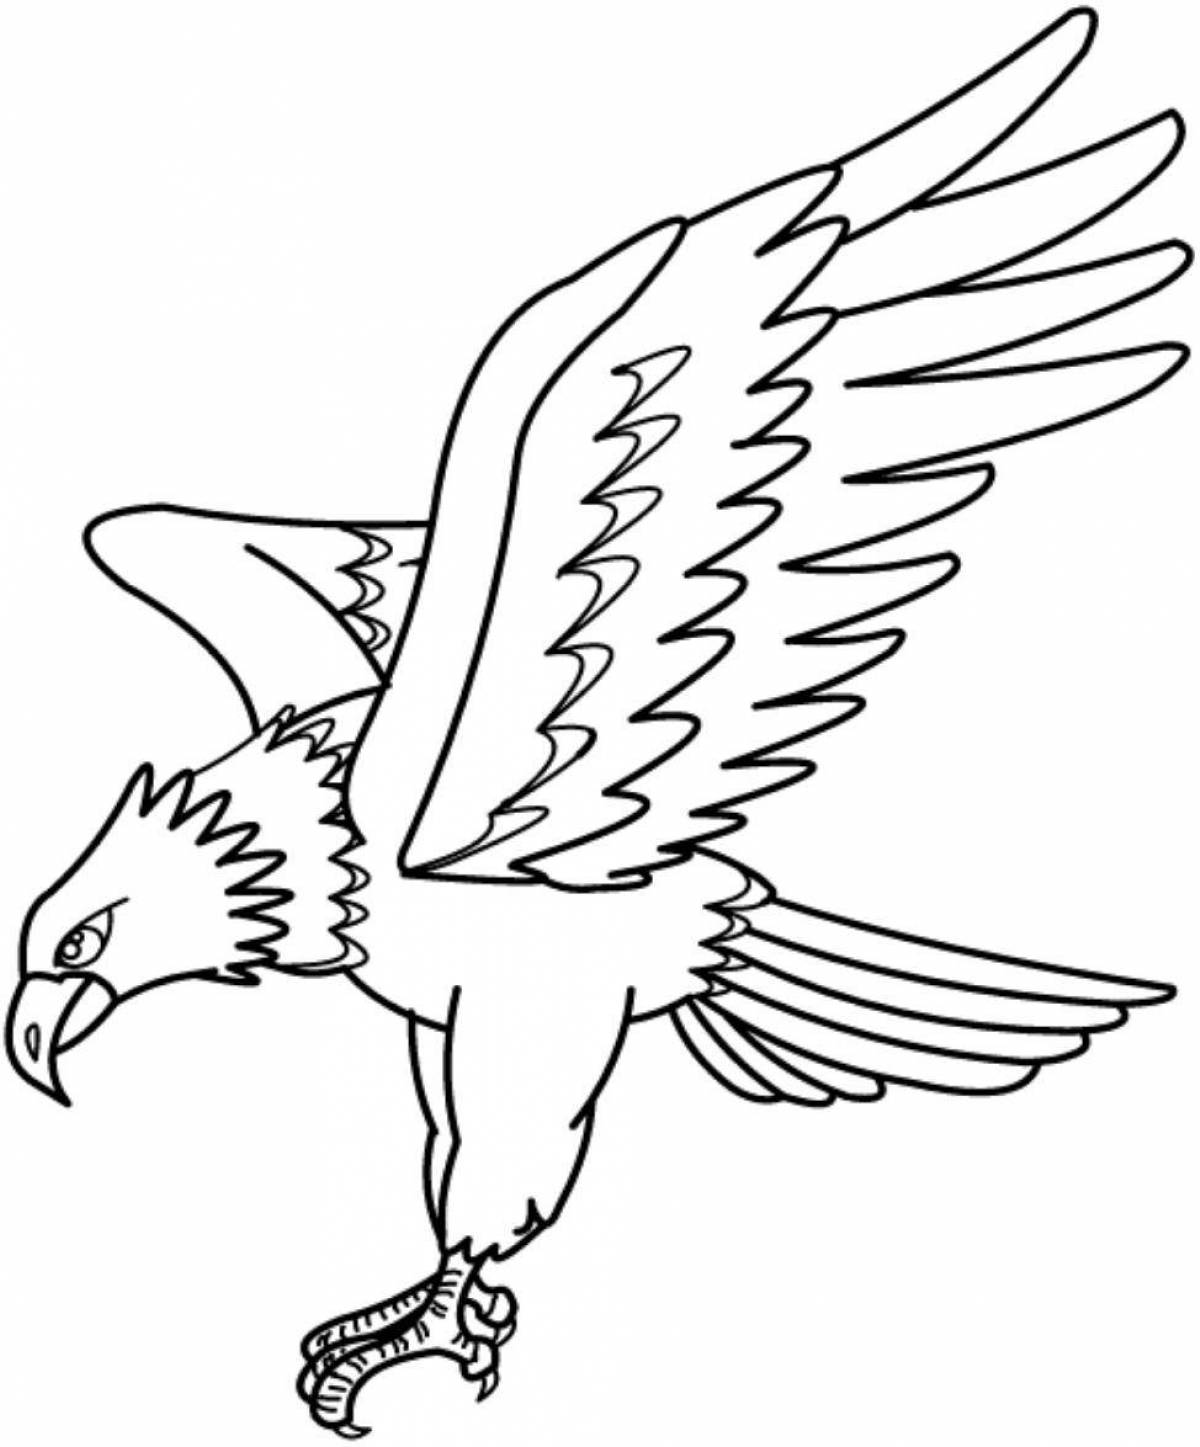 Awesome kite coloring page